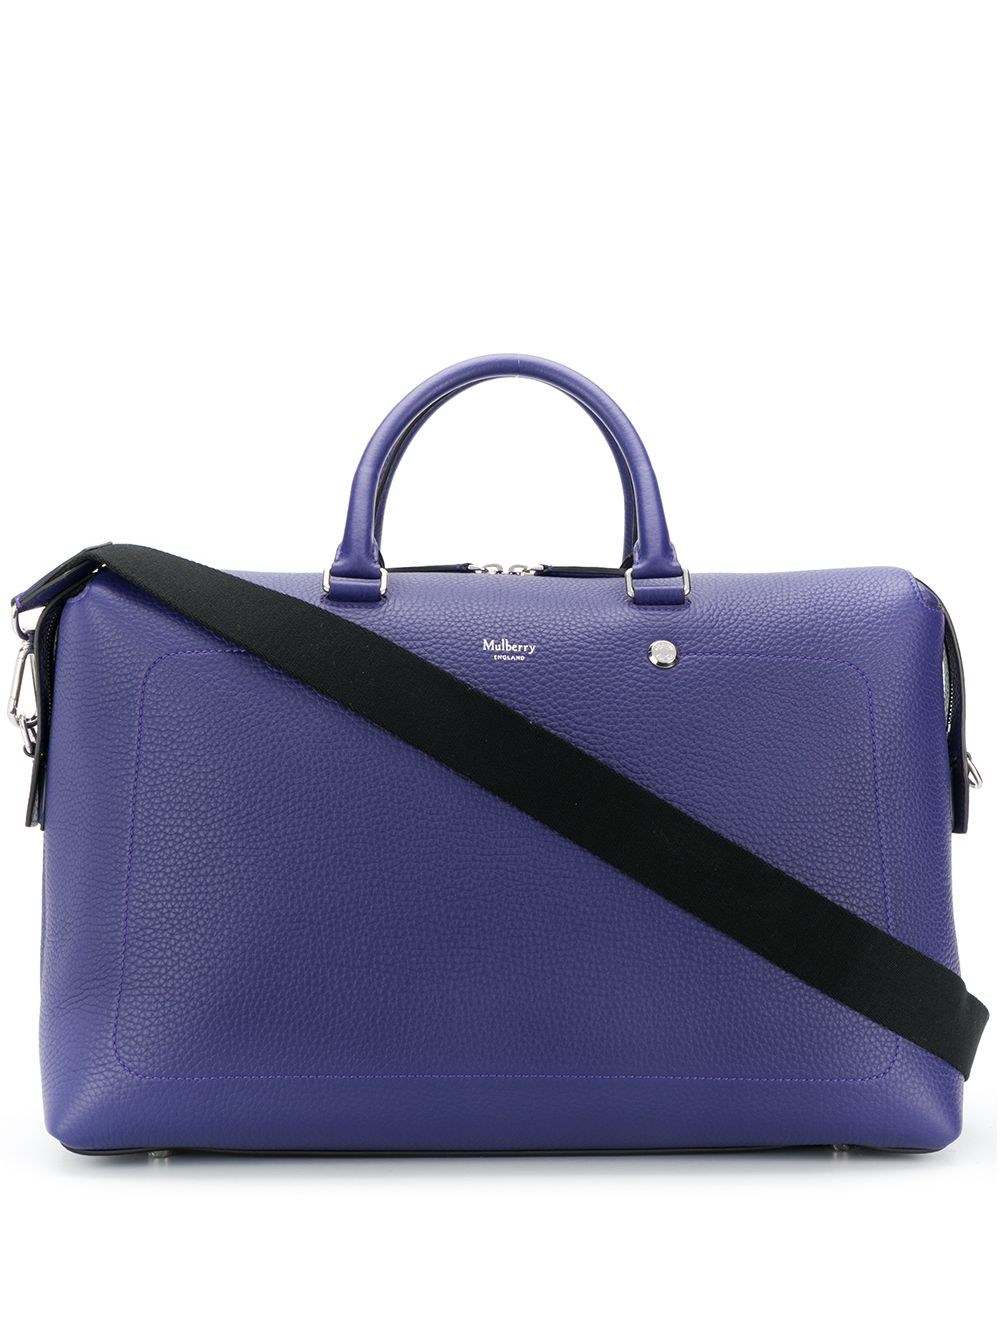 what are the best stylish luxury weekender and duffle bags for a weekend escape?